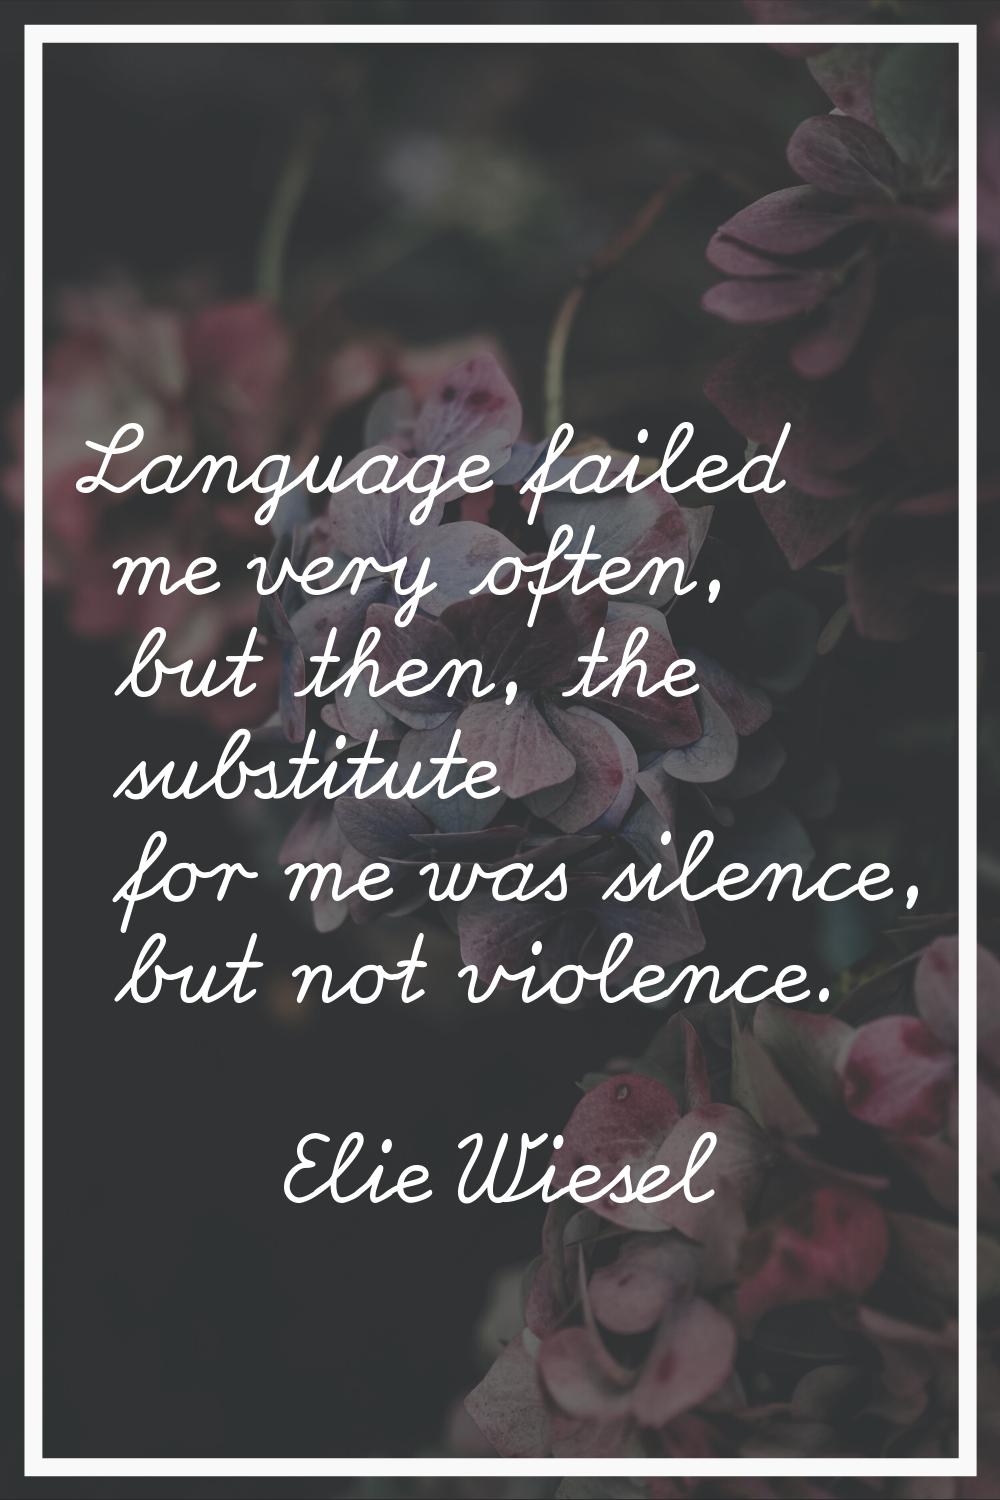 Language failed me very often, but then, the substitute for me was silence, but not violence.